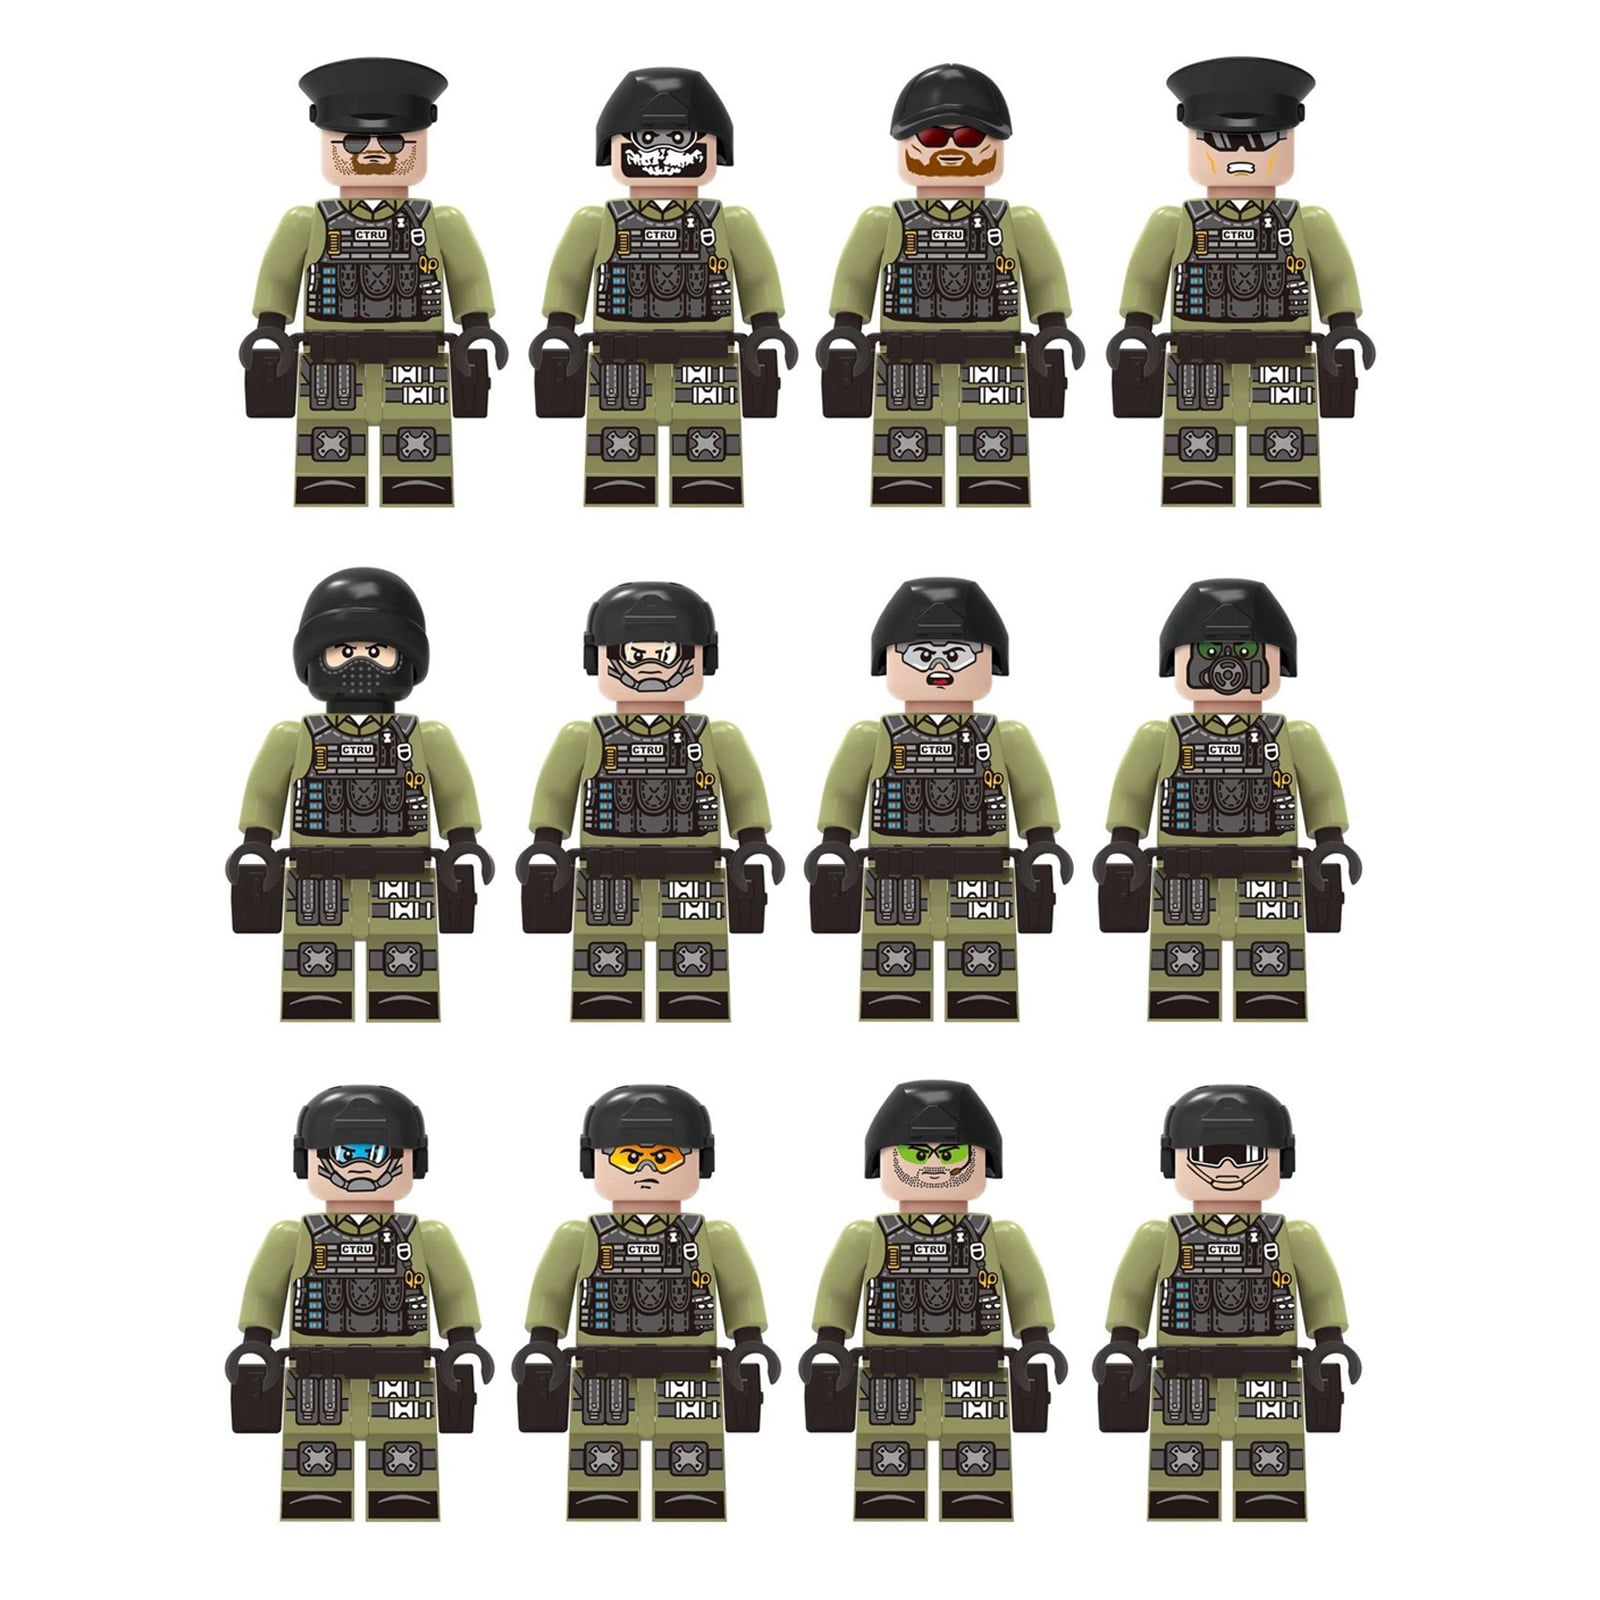 12pcs United States Navy SEALs minifigure building block kids toy gift fit lego 